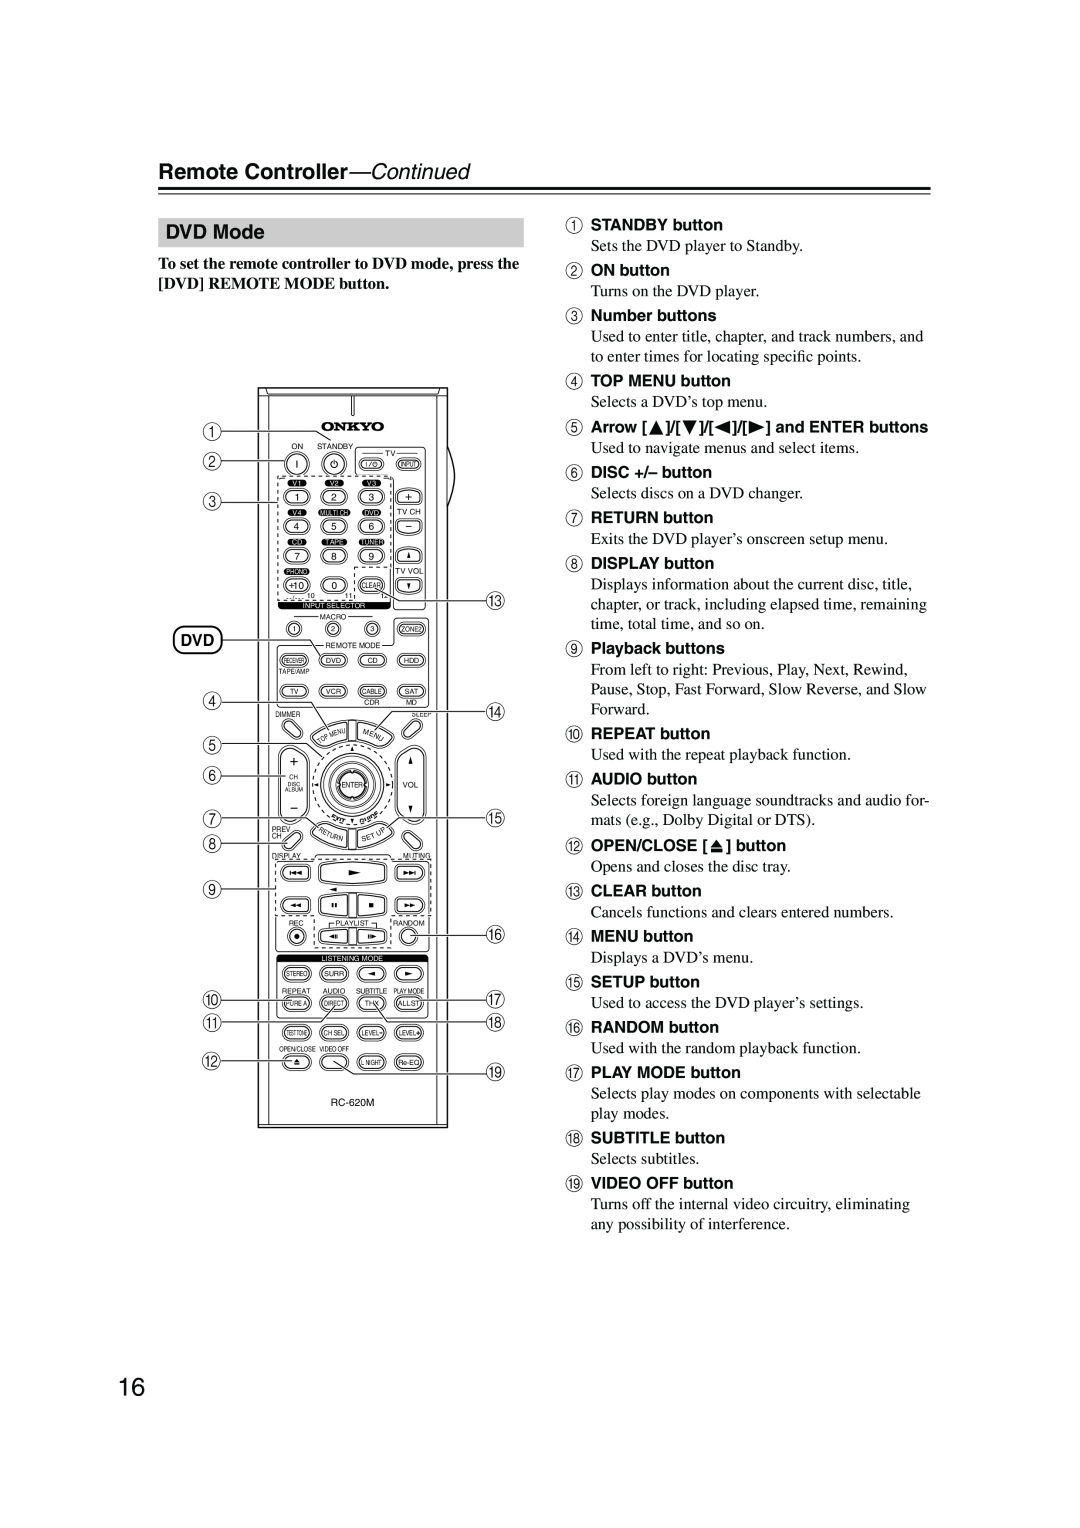 Onkyo SR804 instruction manual DVD Mode, Remote Controller—Continued 